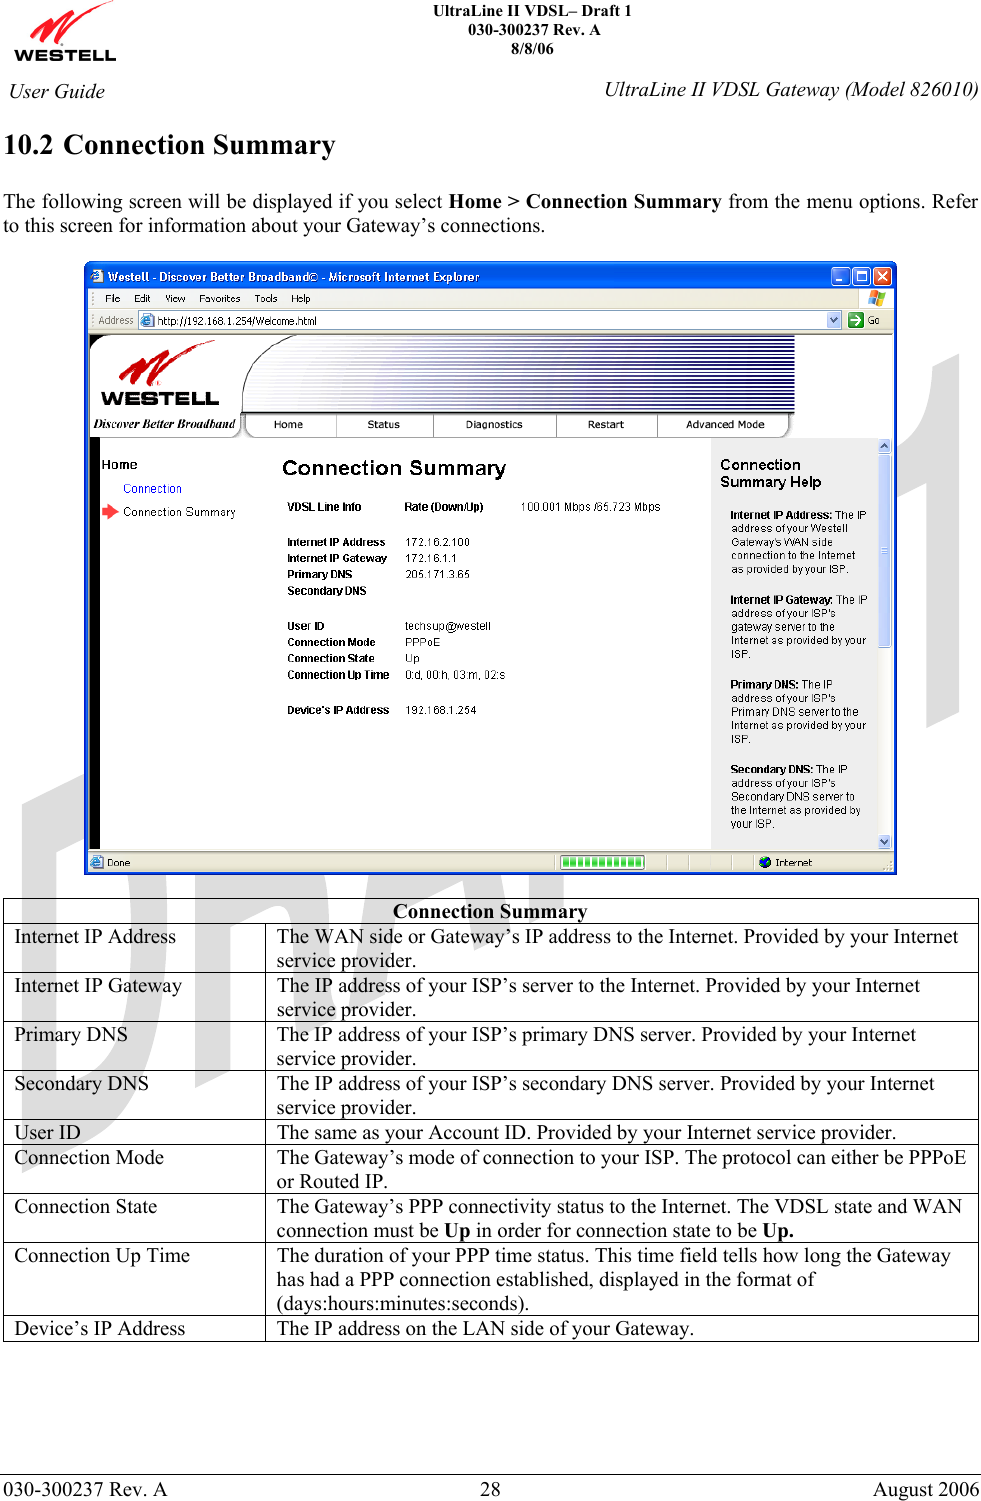    UltraLine II VDSL– Draft 1  030-300237 Rev. A 8/8/06   030-300237 Rev. A  28  August 2006  User Guide  UltraLine II VDSL Gateway (Model 826010) 10.2 Connection Summary  The following screen will be displayed if you select Home &gt; Connection Summary from the menu options. Refer to this screen for information about your Gateway’s connections.    Connection Summary Internet IP Address  The WAN side or Gateway’s IP address to the Internet. Provided by your Internet service provider. Internet IP Gateway  The IP address of your ISP’s server to the Internet. Provided by your Internet service provider. Primary DNS  The IP address of your ISP’s primary DNS server. Provided by your Internet service provider. Secondary DNS  The IP address of your ISP’s secondary DNS server. Provided by your Internet service provider. User ID  The same as your Account ID. Provided by your Internet service provider. Connection Mode  The Gateway’s mode of connection to your ISP. The protocol can either be PPPoE or Routed IP. Connection State  The Gateway’s PPP connectivity status to the Internet. The VDSL state and WAN connection must be Up in order for connection state to be Up. Connection Up Time  The duration of your PPP time status. This time field tells how long the Gateway has had a PPP connection established, displayed in the format of (days:hours:minutes:seconds). Device’s IP Address  The IP address on the LAN side of your Gateway.  